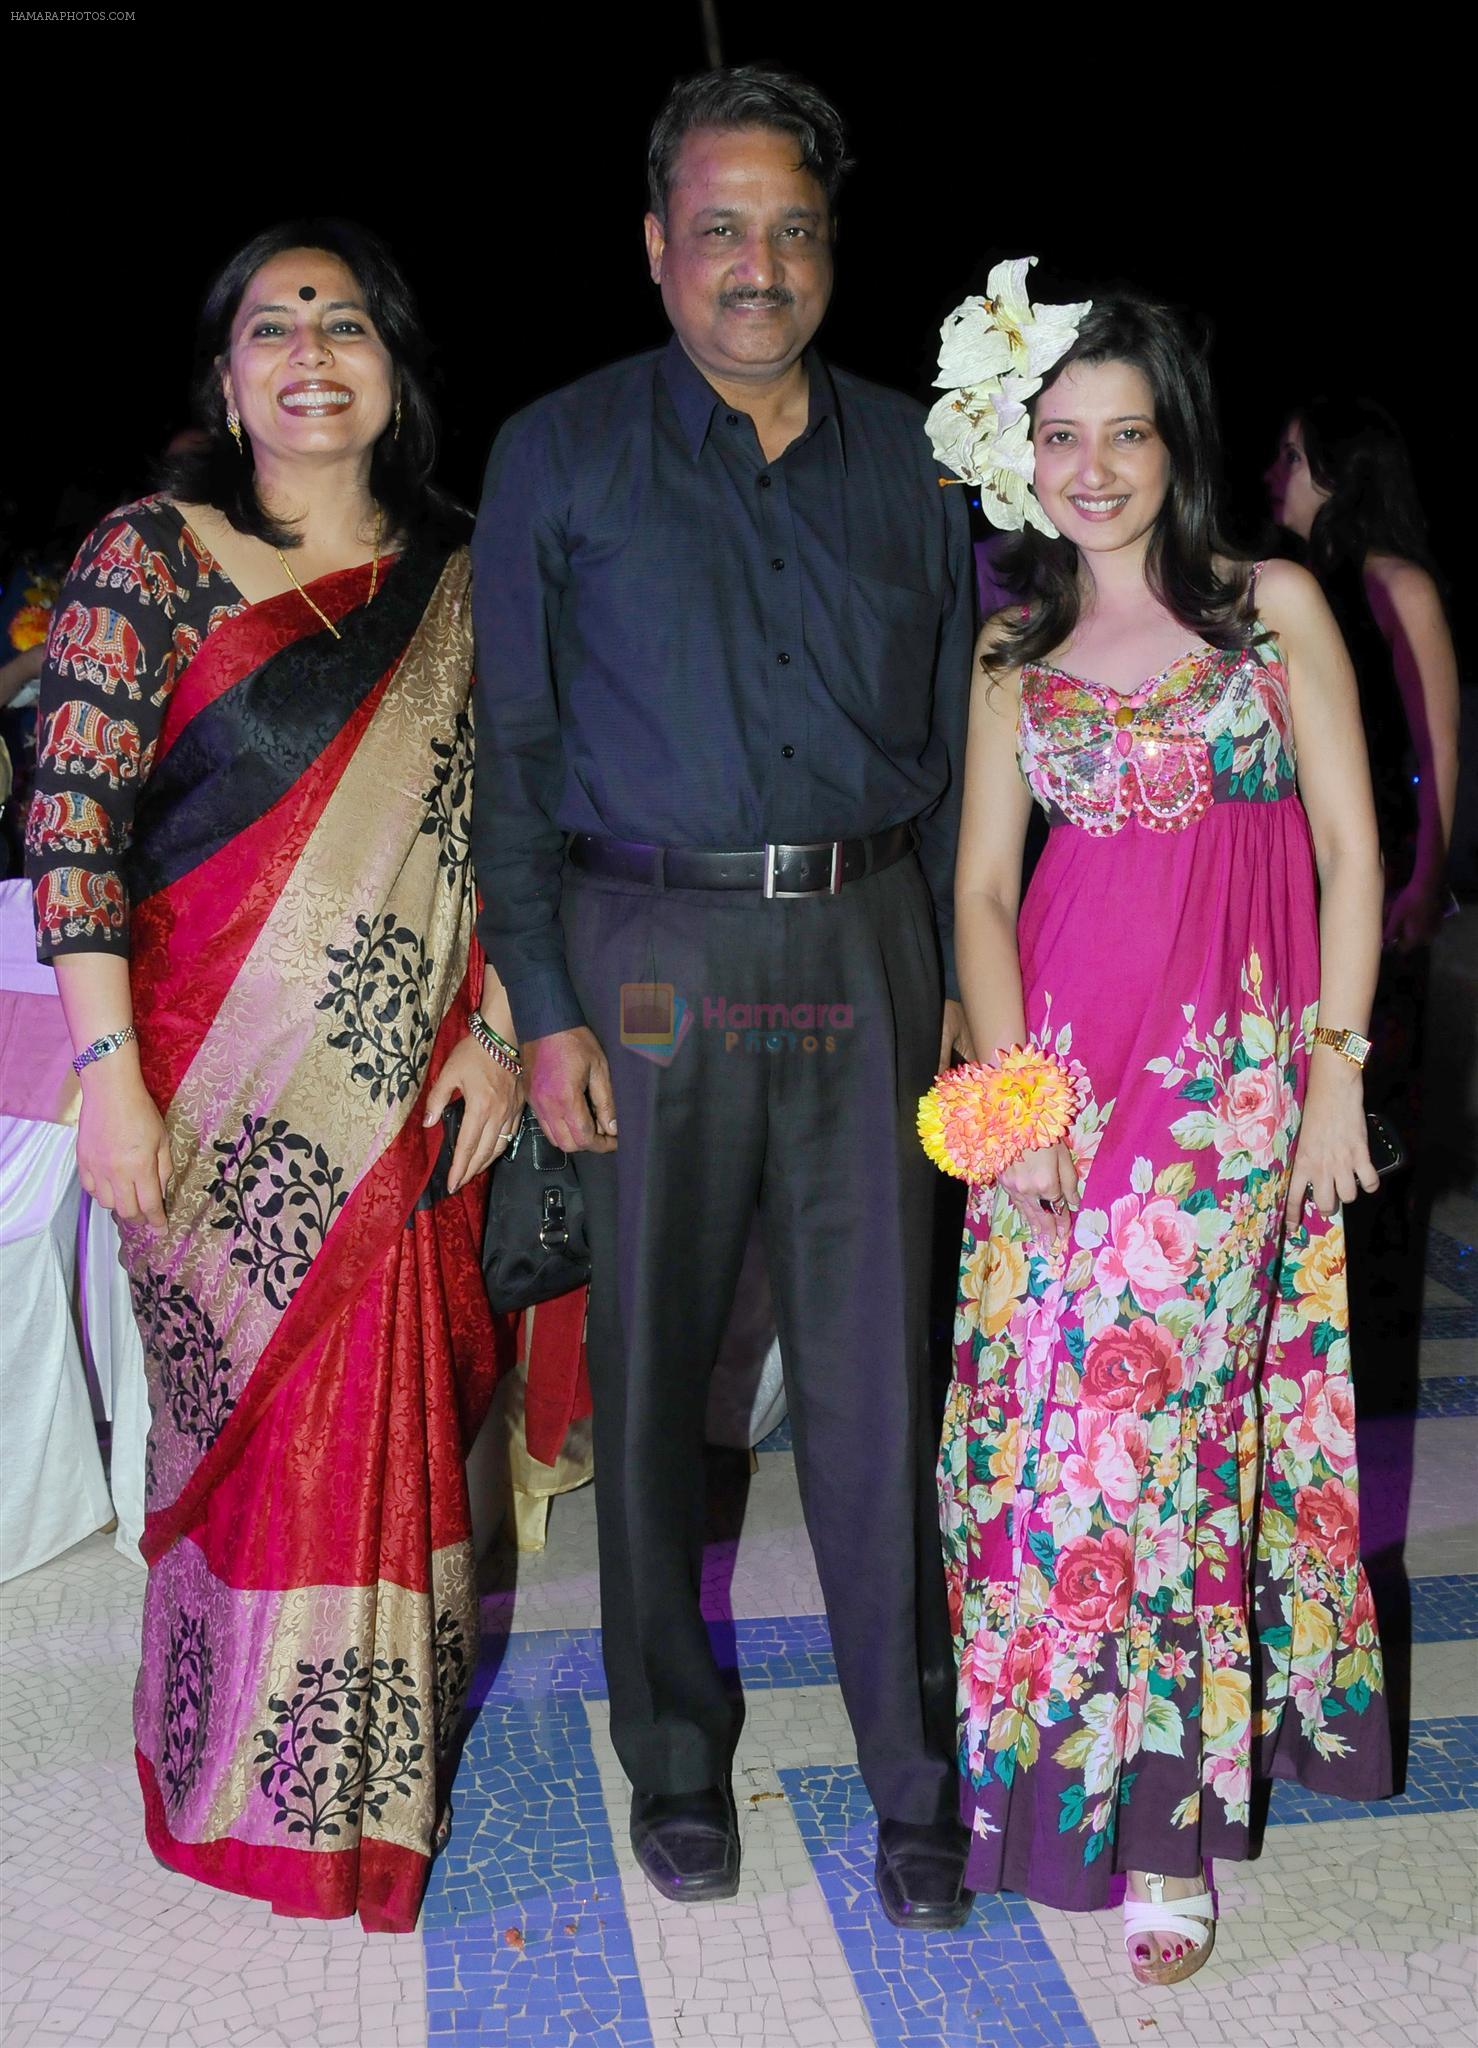 Abha and Y.P. Singh with Amy Billimoria at Naughty at forty Hawain surprise birthday party by Amy Billimoria on 12th March 2012